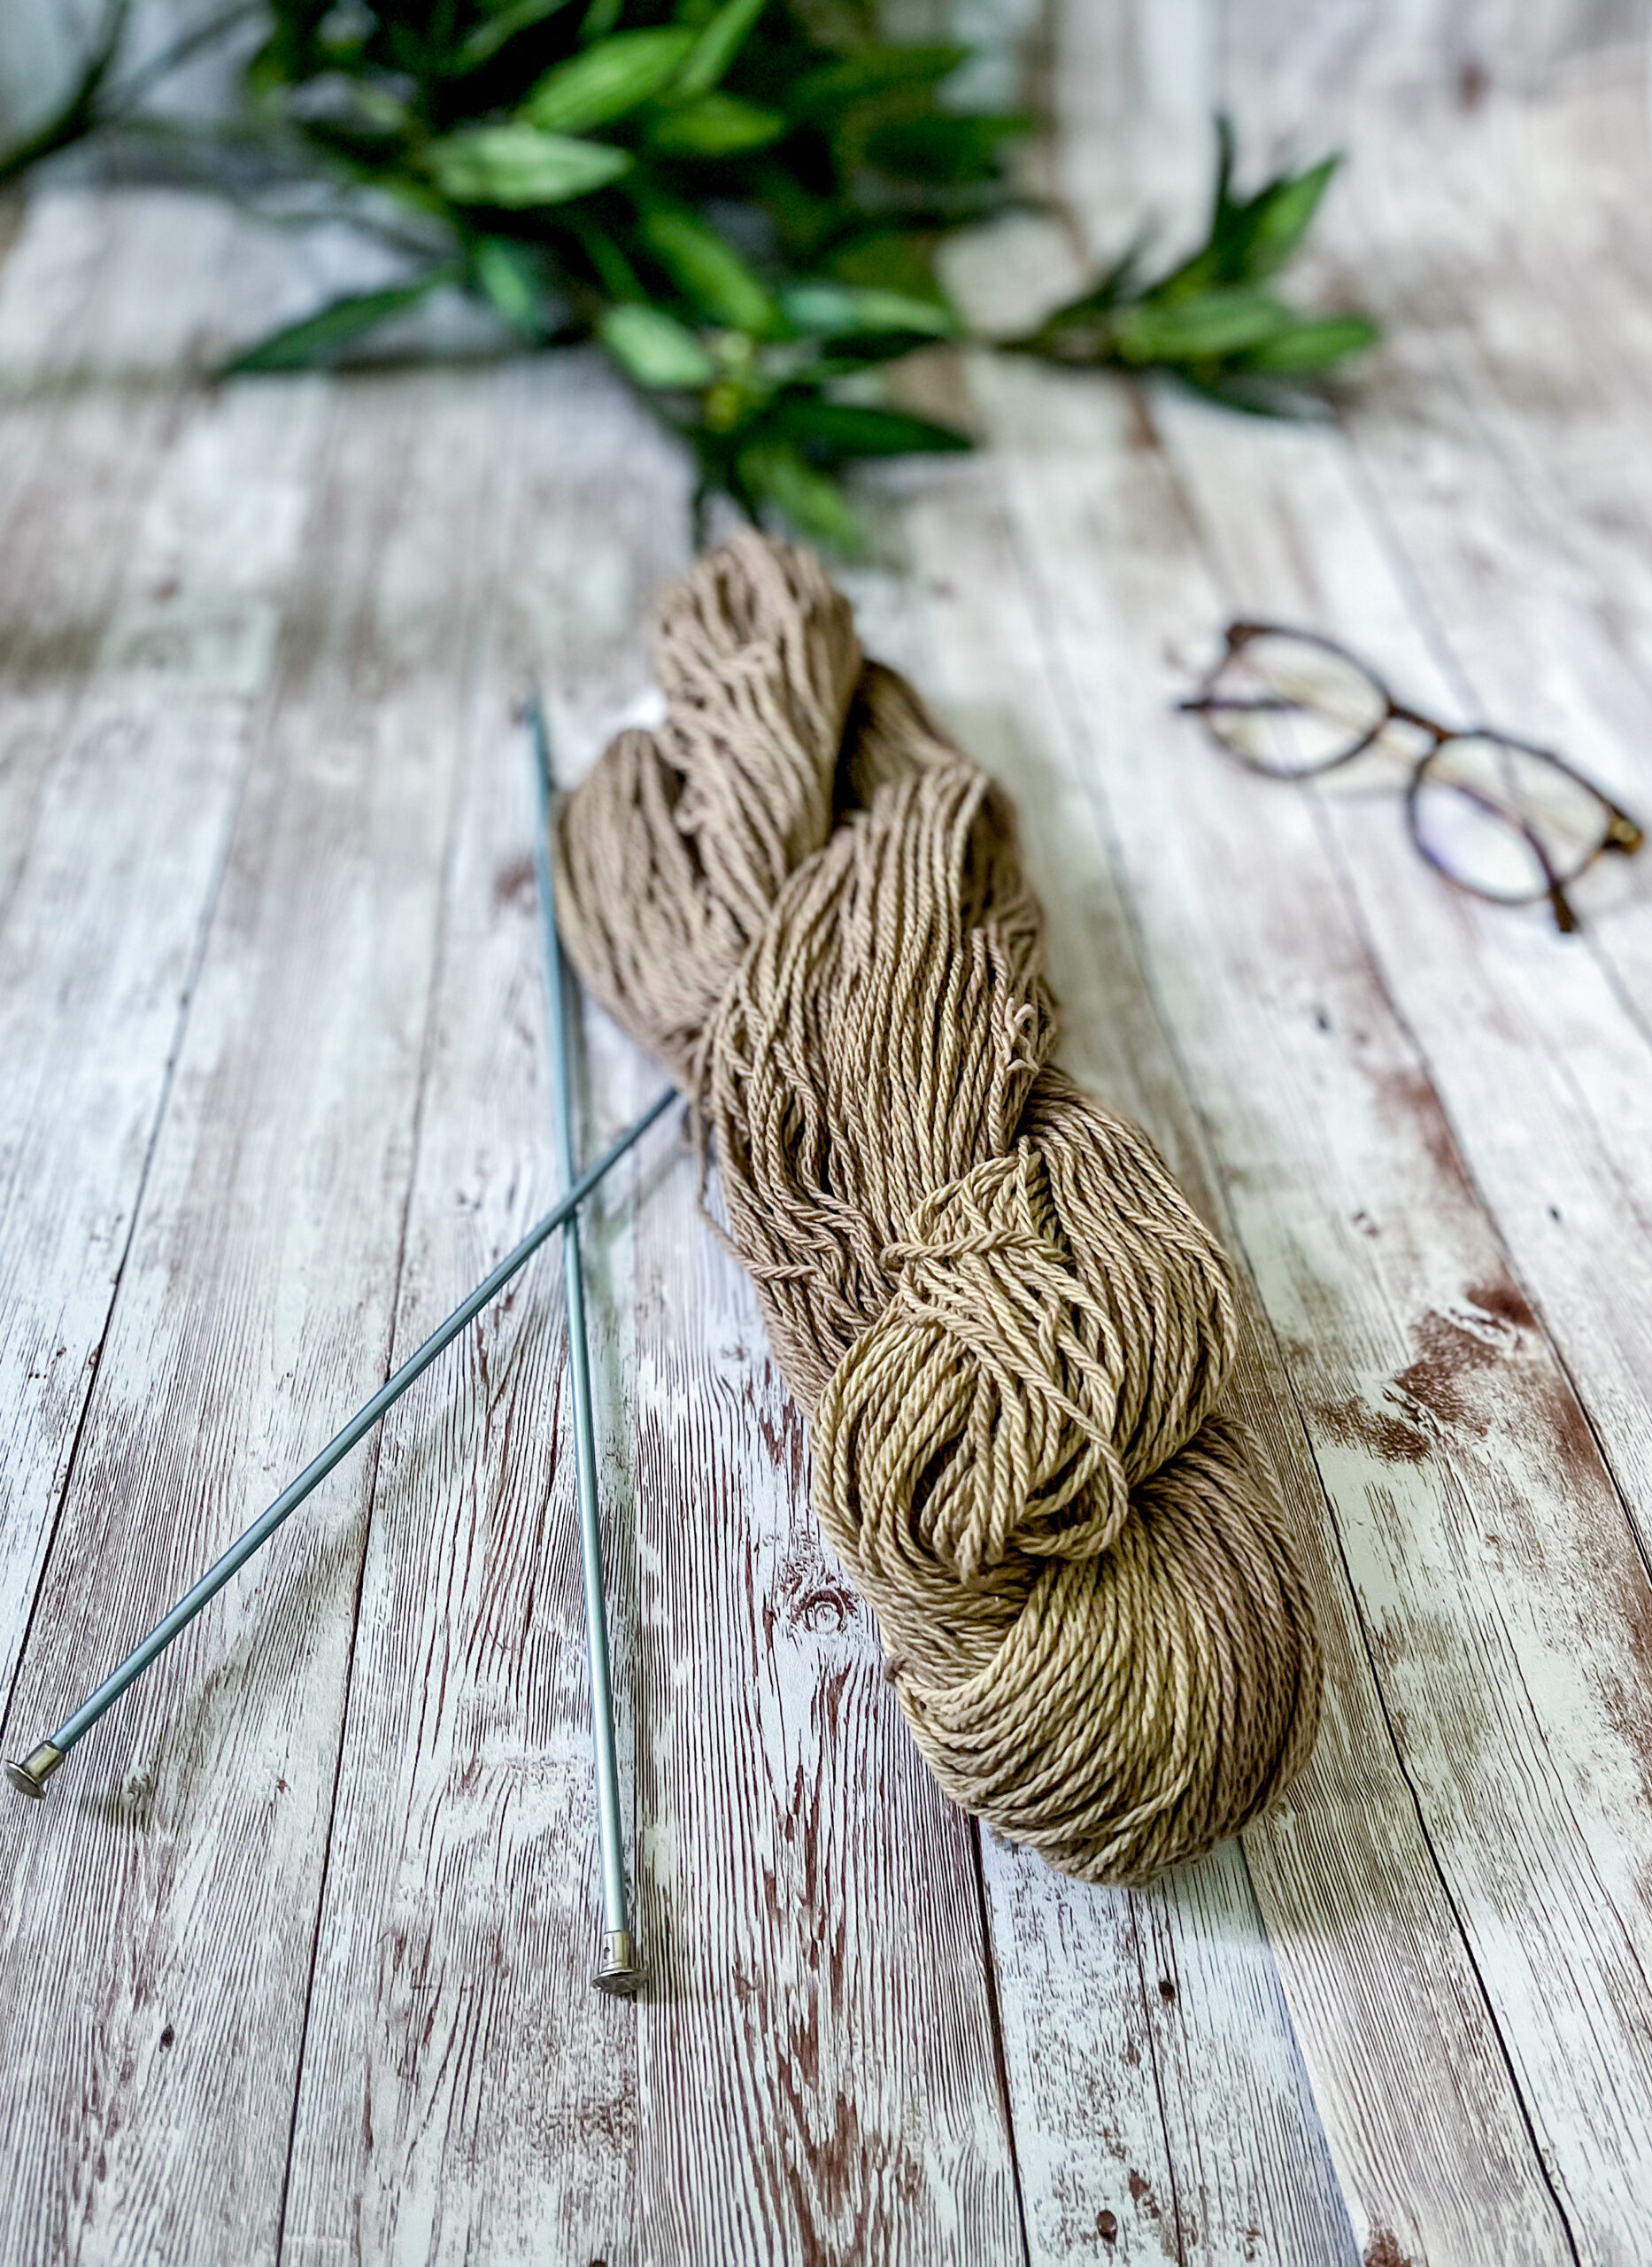 A skein of brown Virginia-grown cotton rests on a wood panel, with a pair of knitting needles, reading glasses and greenery around it